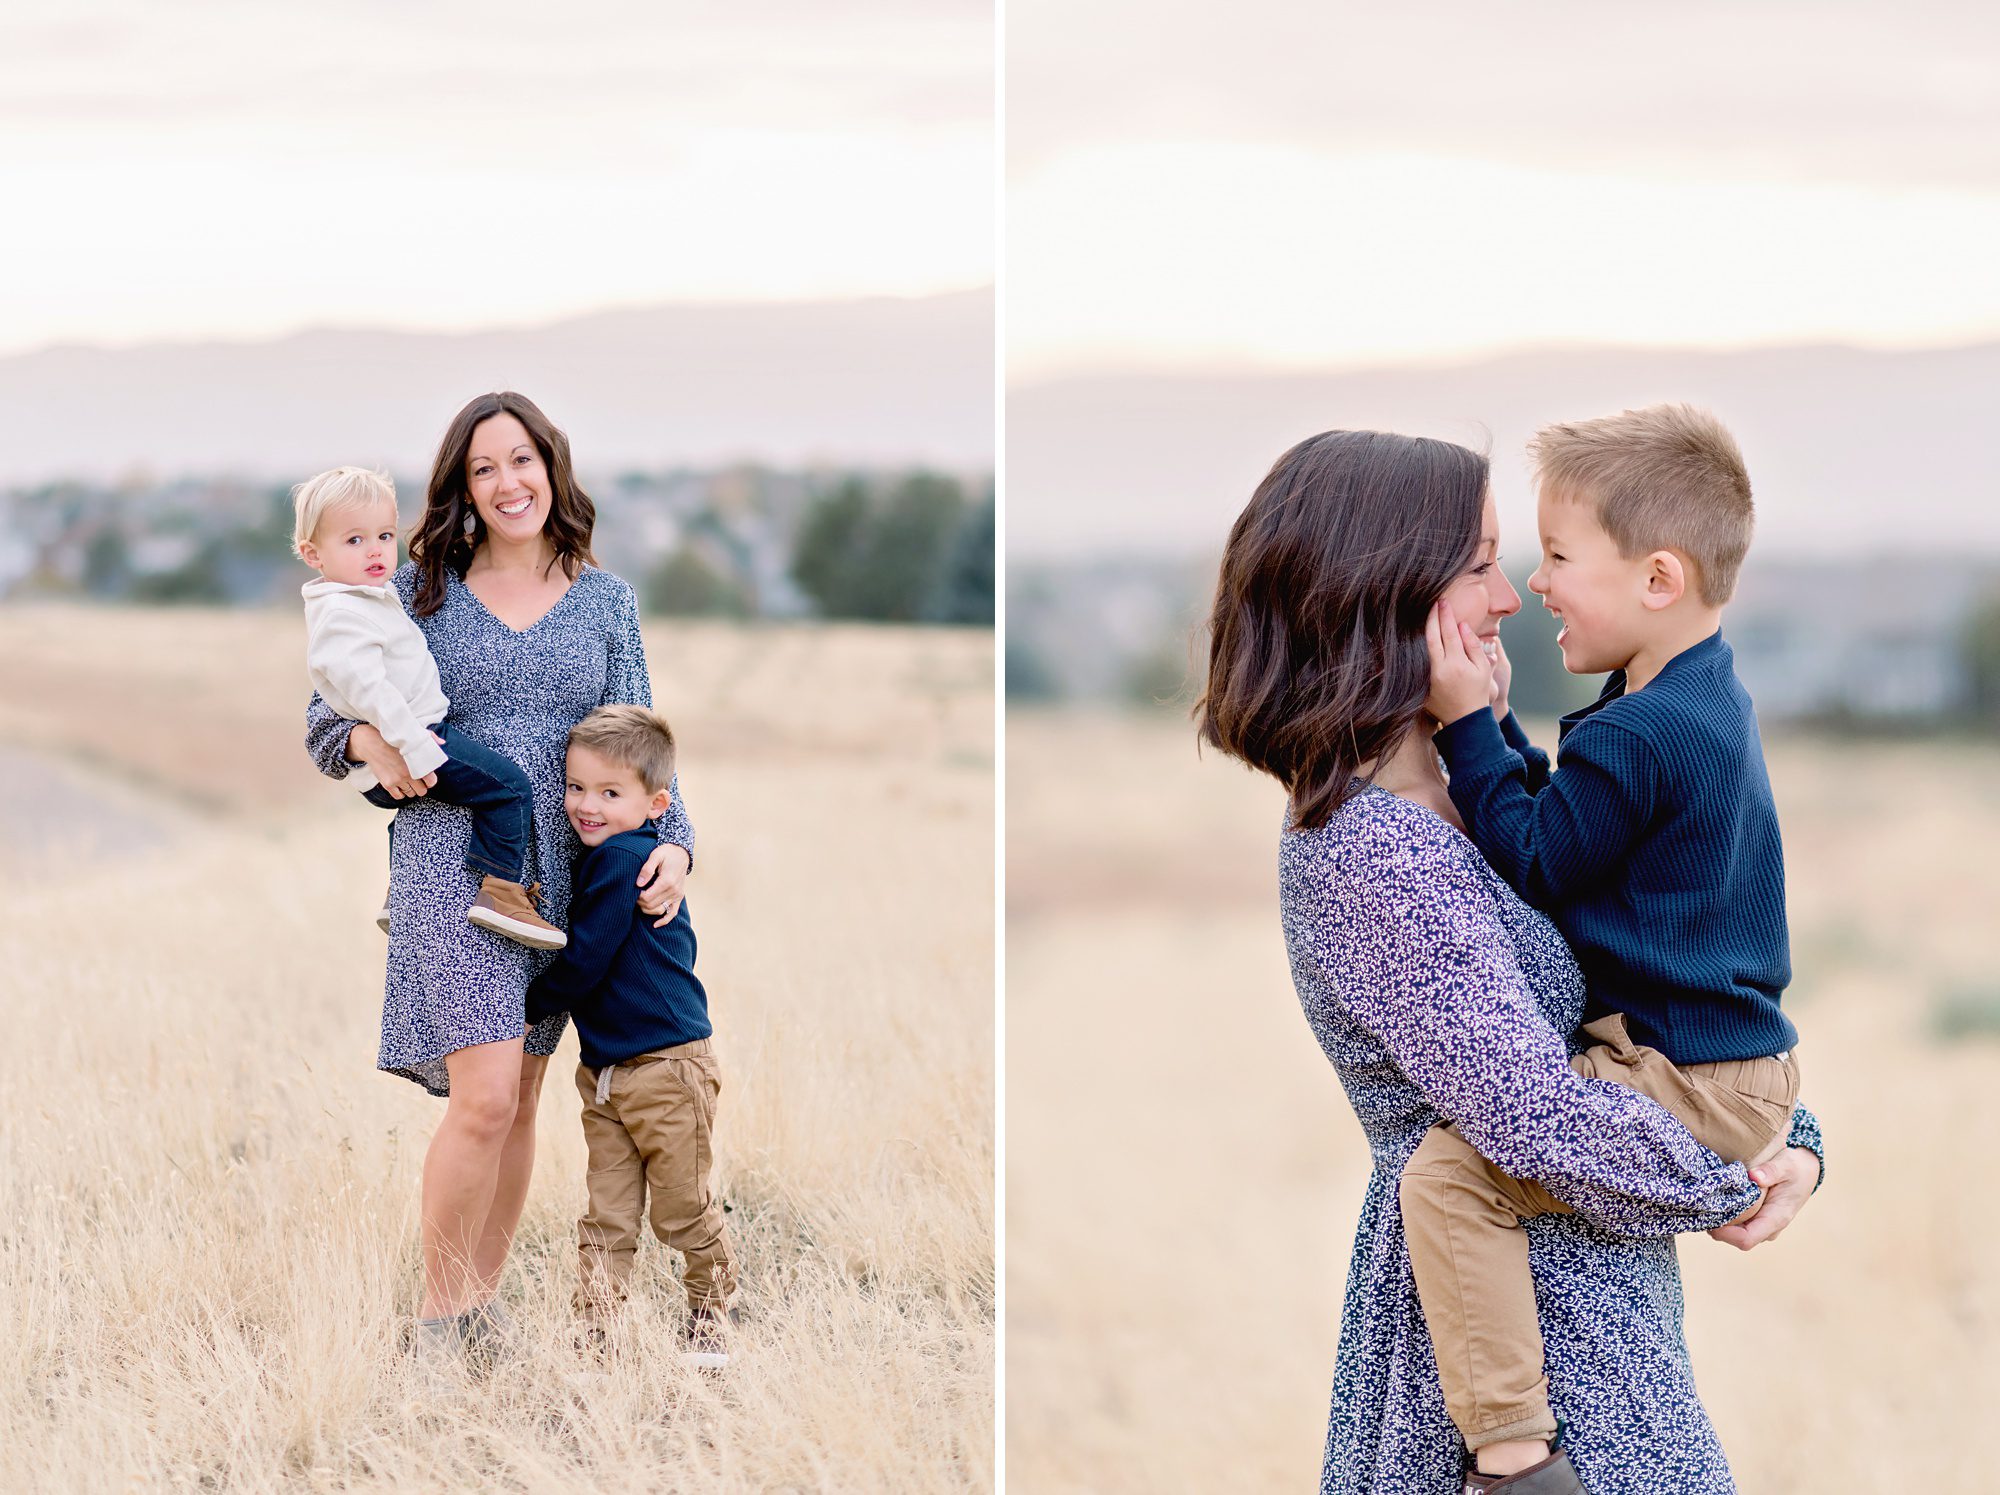 A family of 4 with 2 young boys get family photos taken in a field in Highlands Ranch, CO with a beautiful sunset and mountain backdrop.